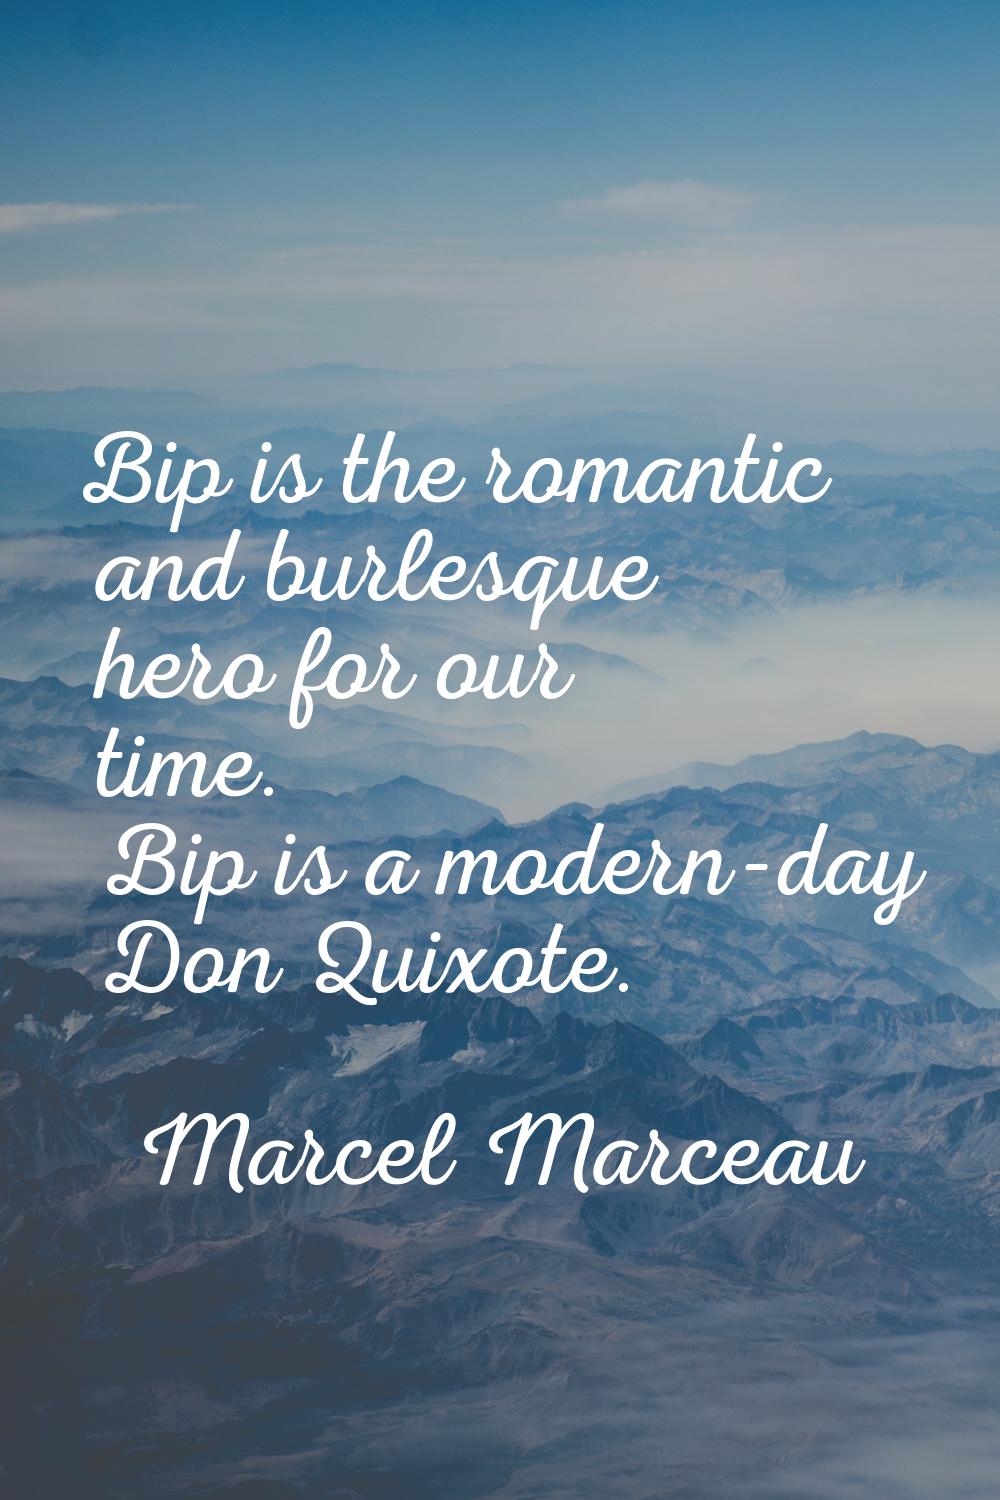 Bip is the romantic and burlesque hero for our time. Bip is a modern-day Don Quixote.